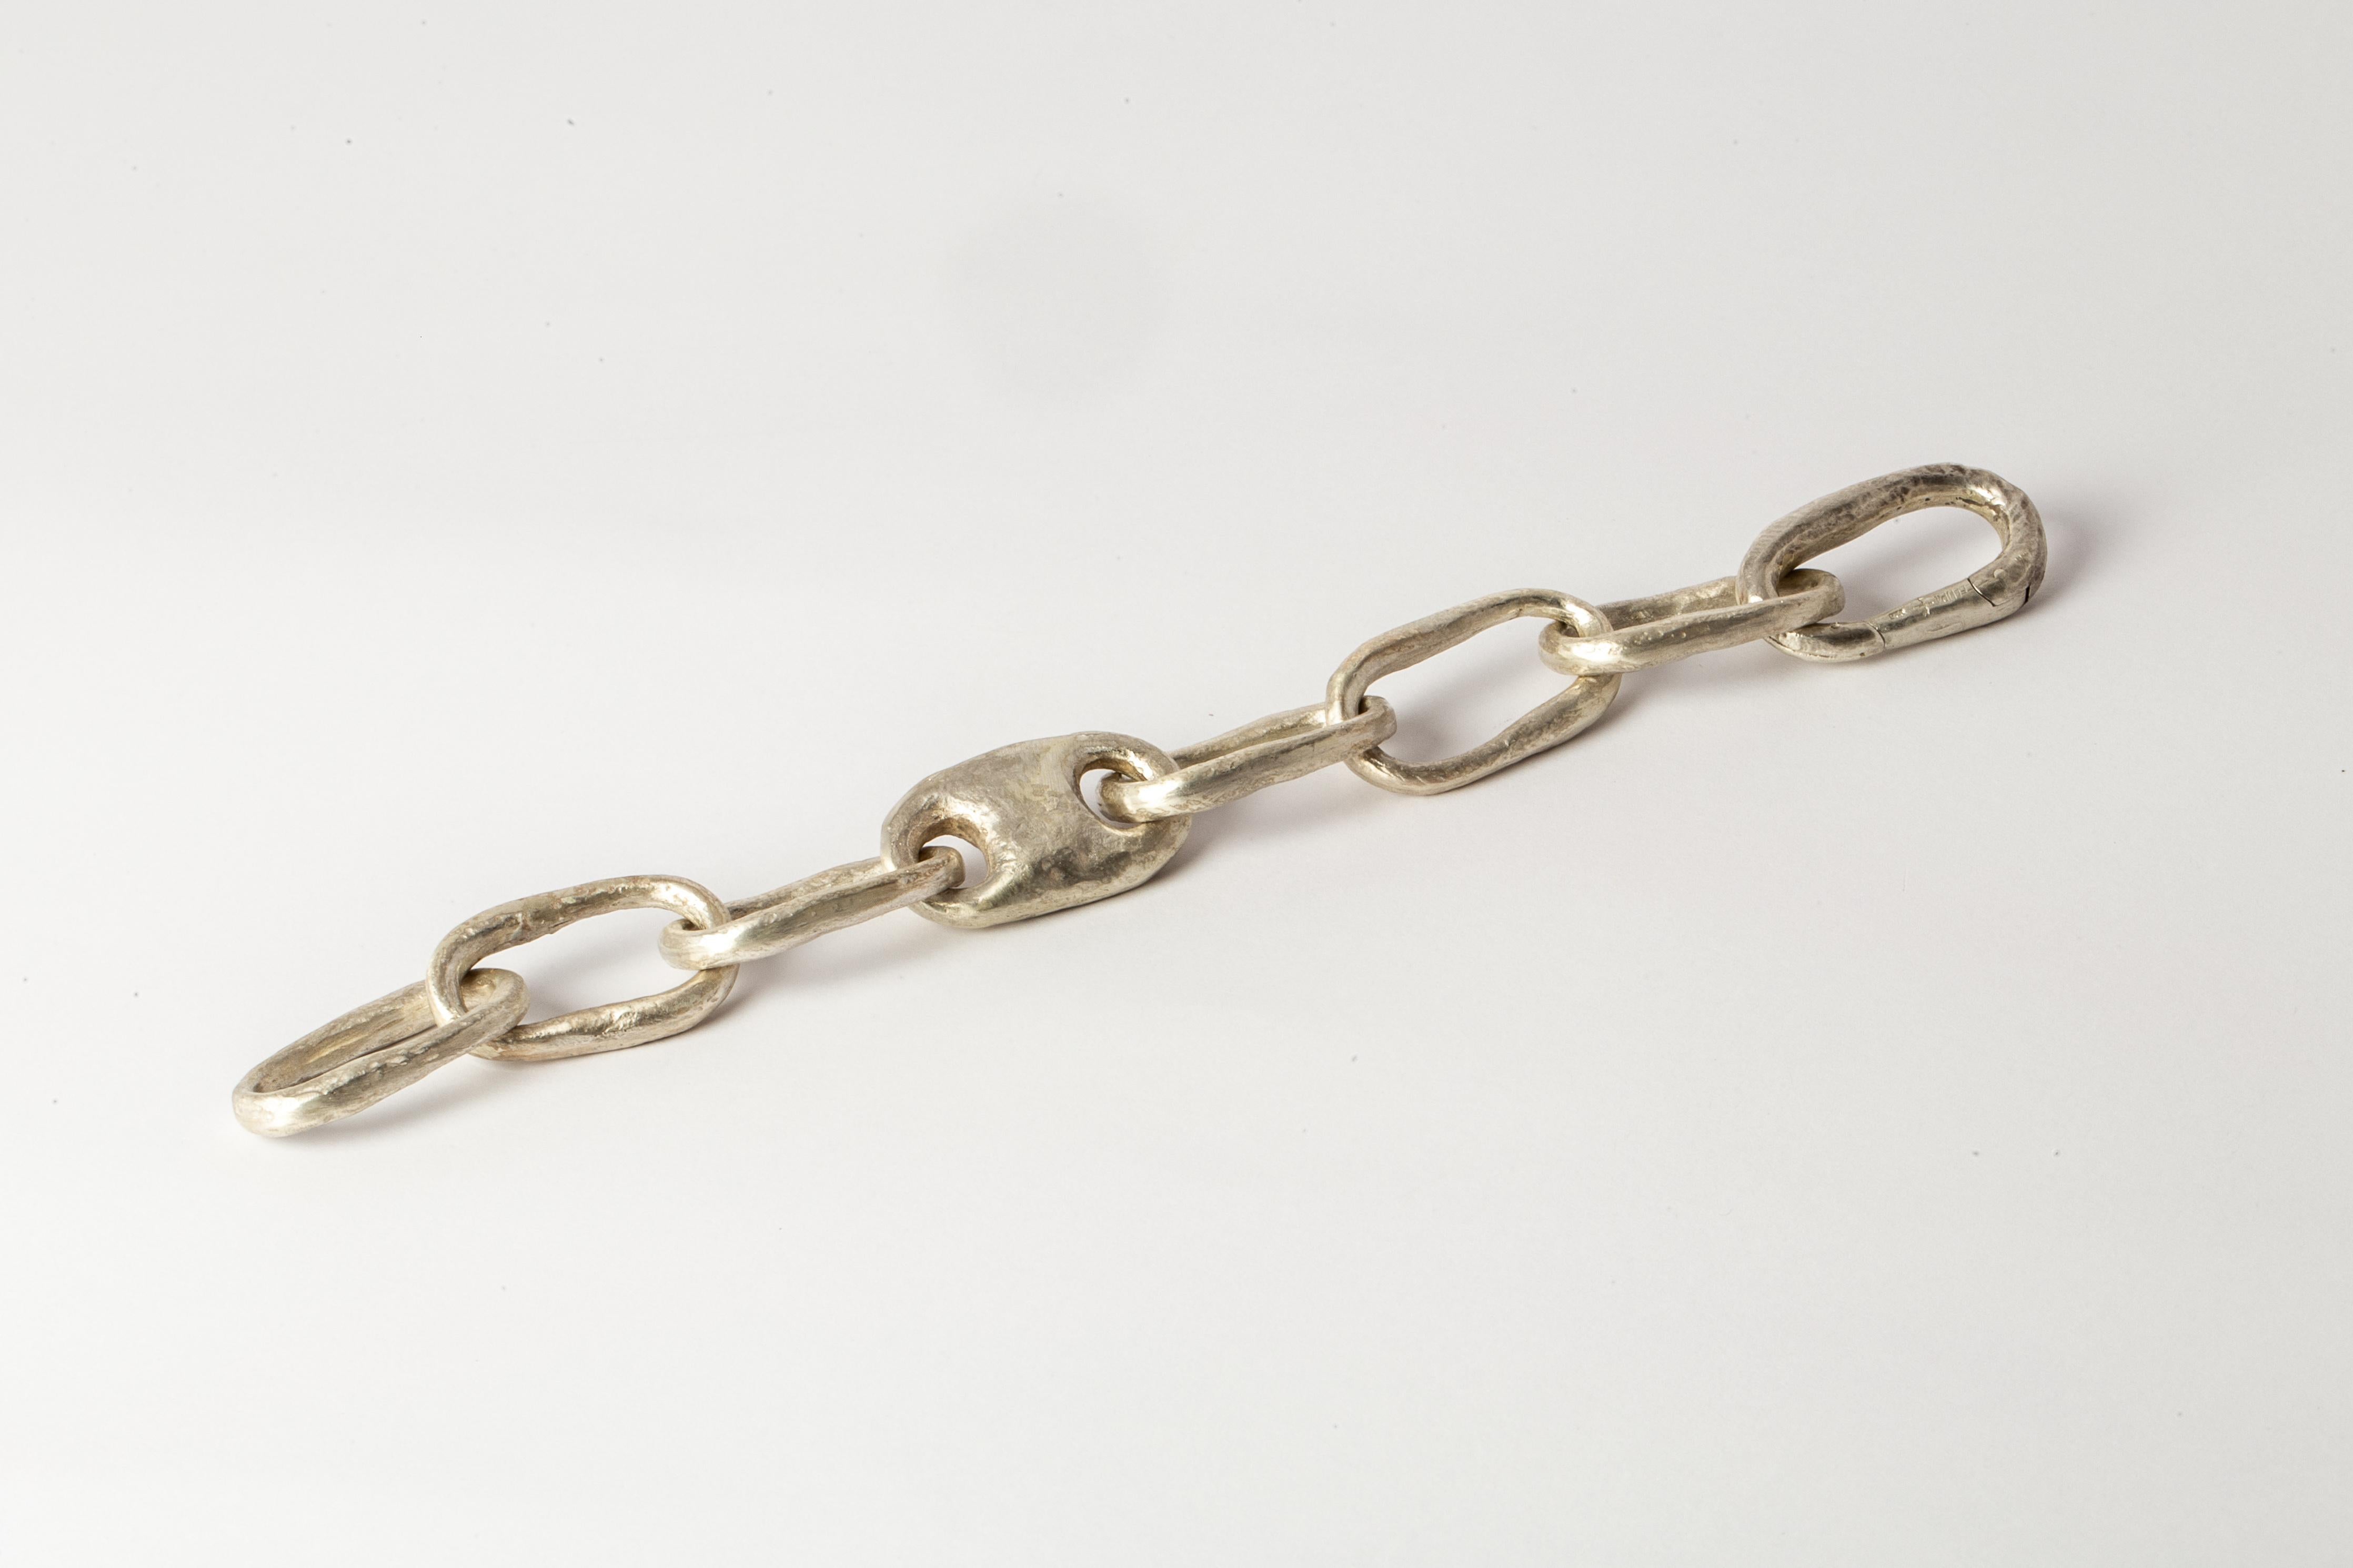 Roman Small Link Bracelet w/ Small Closed Link (MA) For Sale 1